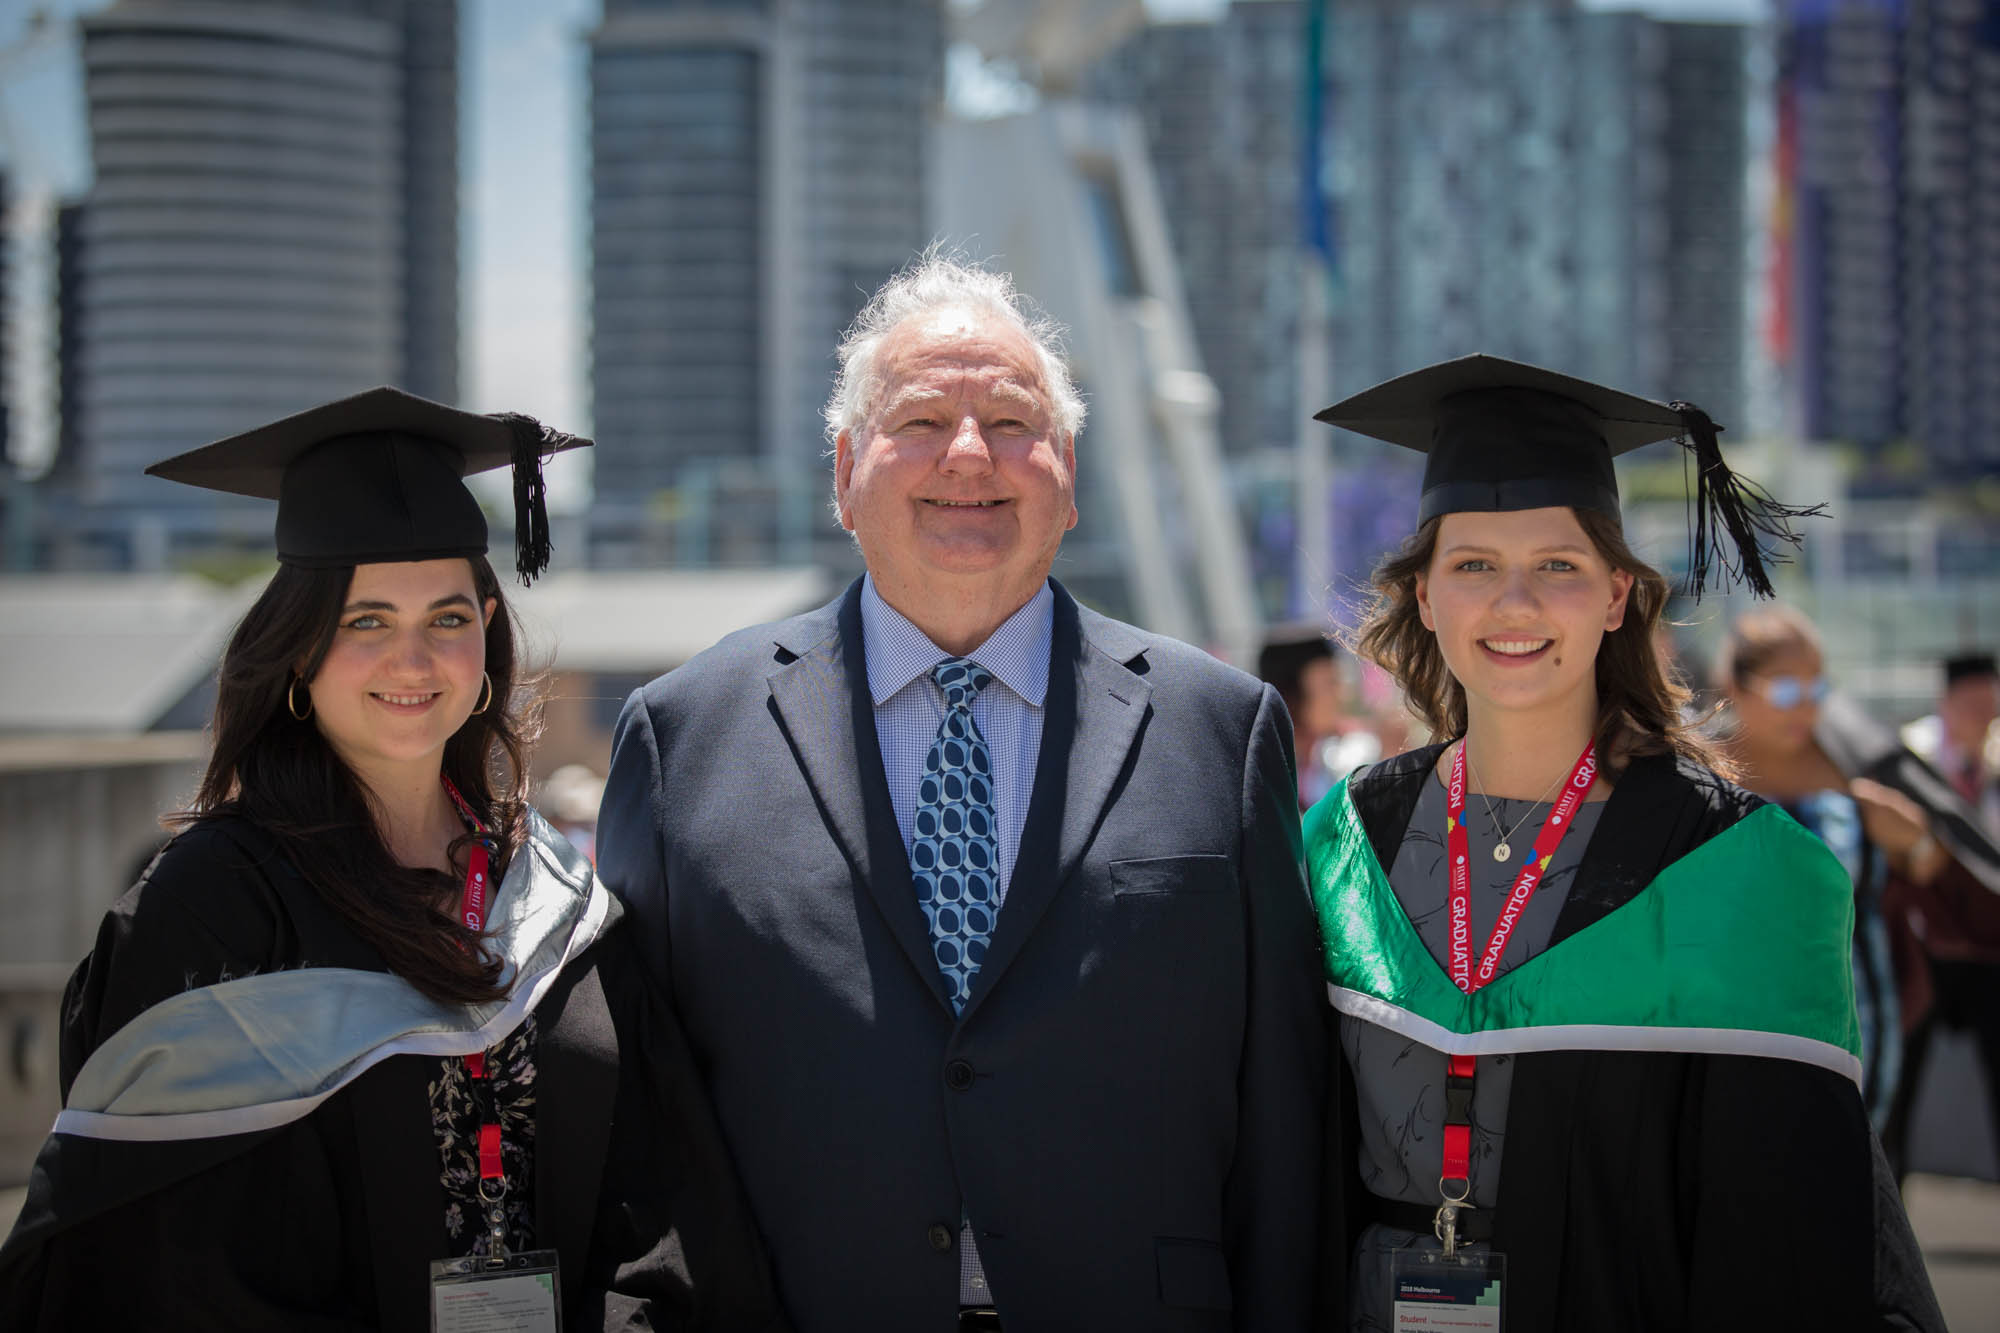 RMIT alumnus Peter Murray with graduating granddaughters Madeleine and Nathalie